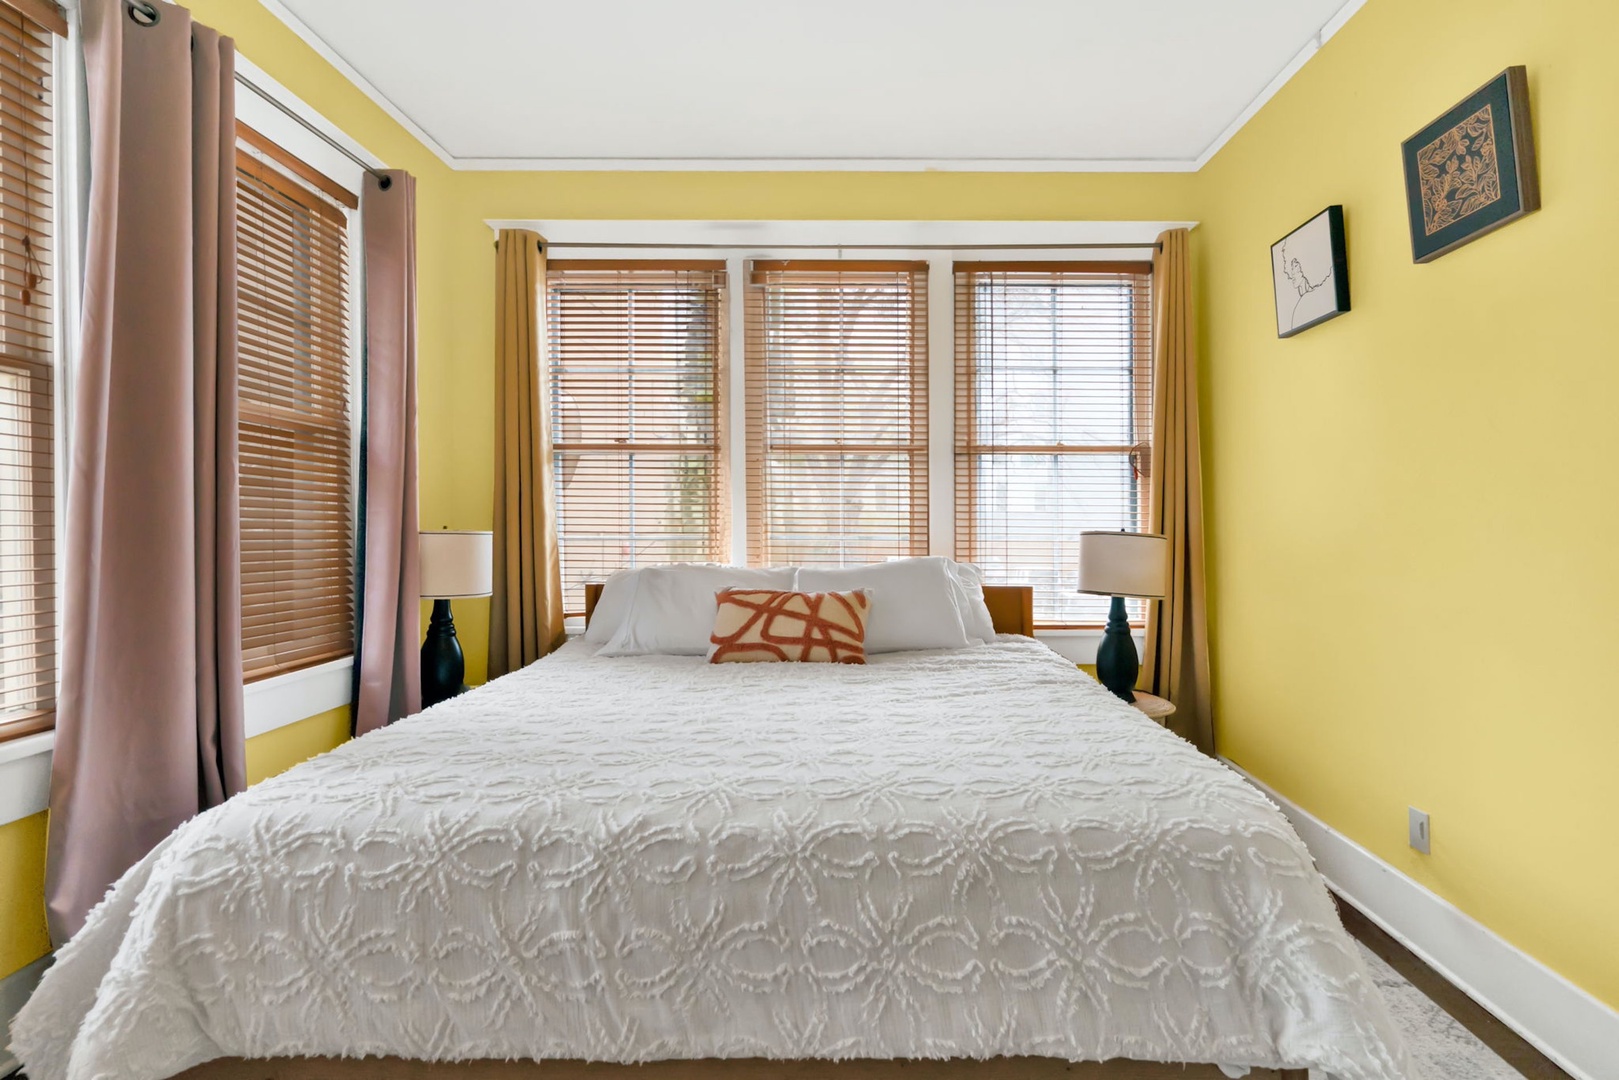 The second cheerful bedroom features lots of windows & a cozy king bed